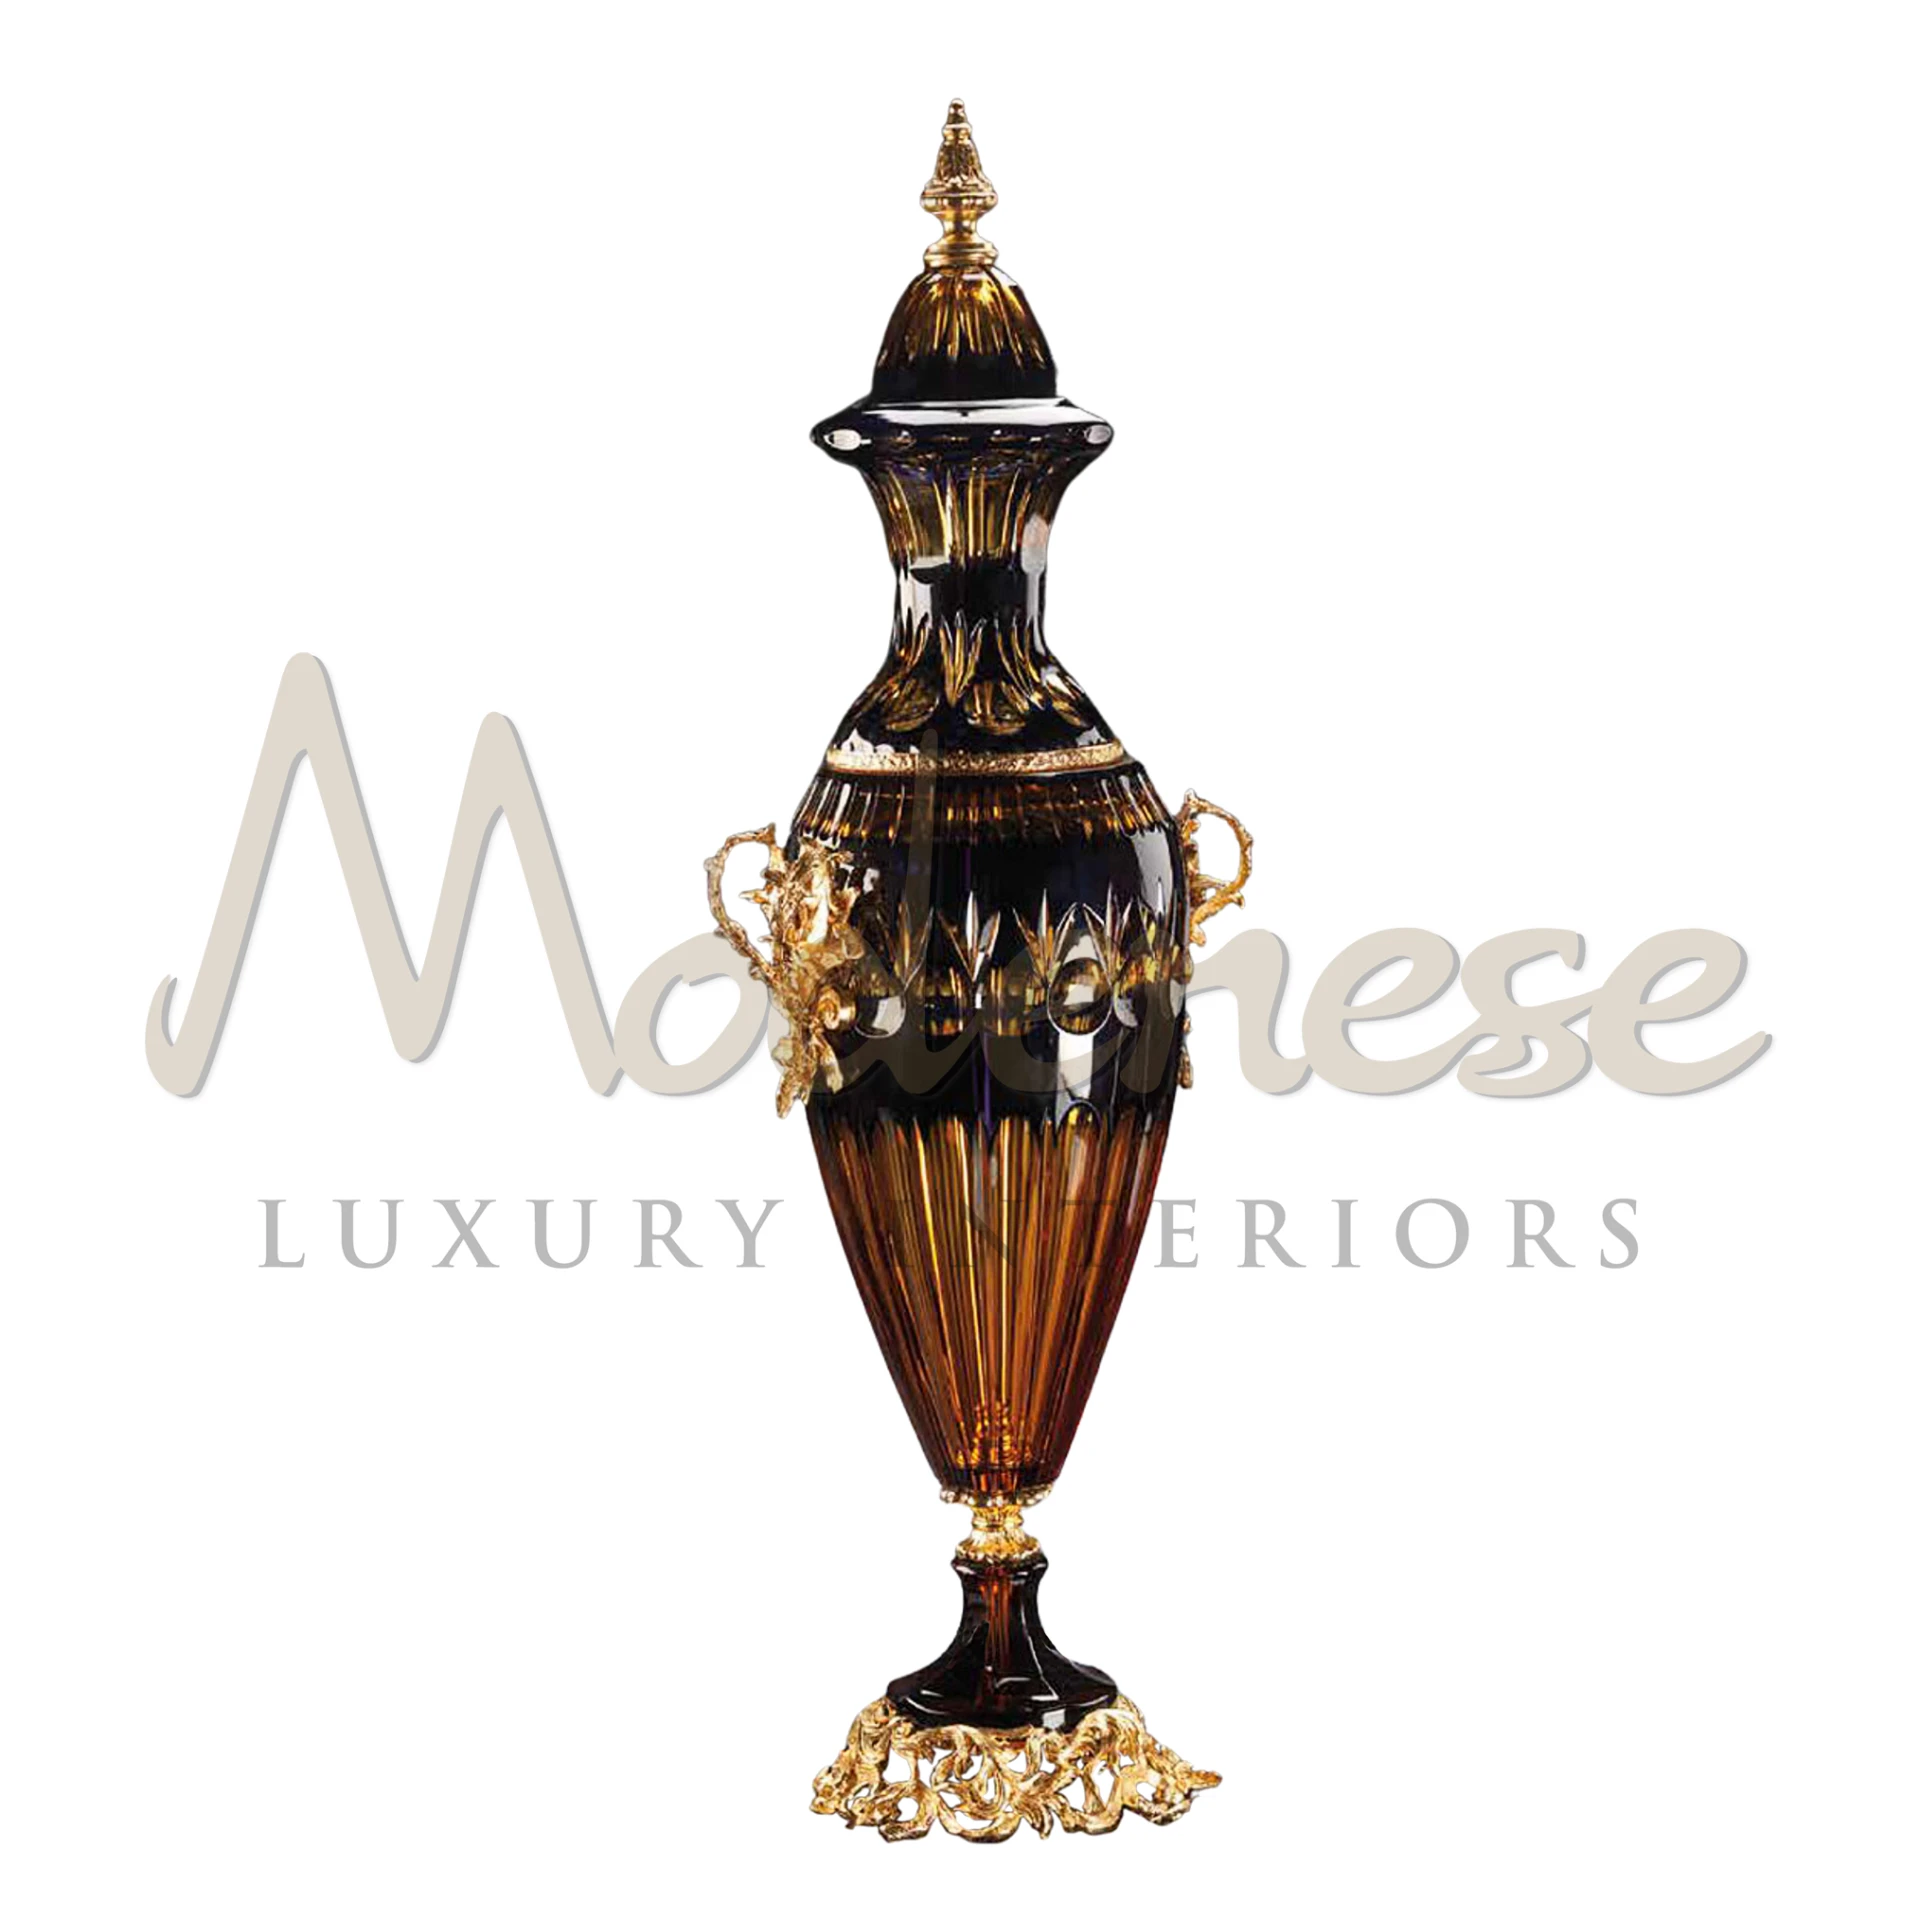 Elegant Tall Glass Amphora by Modenese, with a refined ancient Greek design, perfect for adding timeless beauty to luxury interiors.






